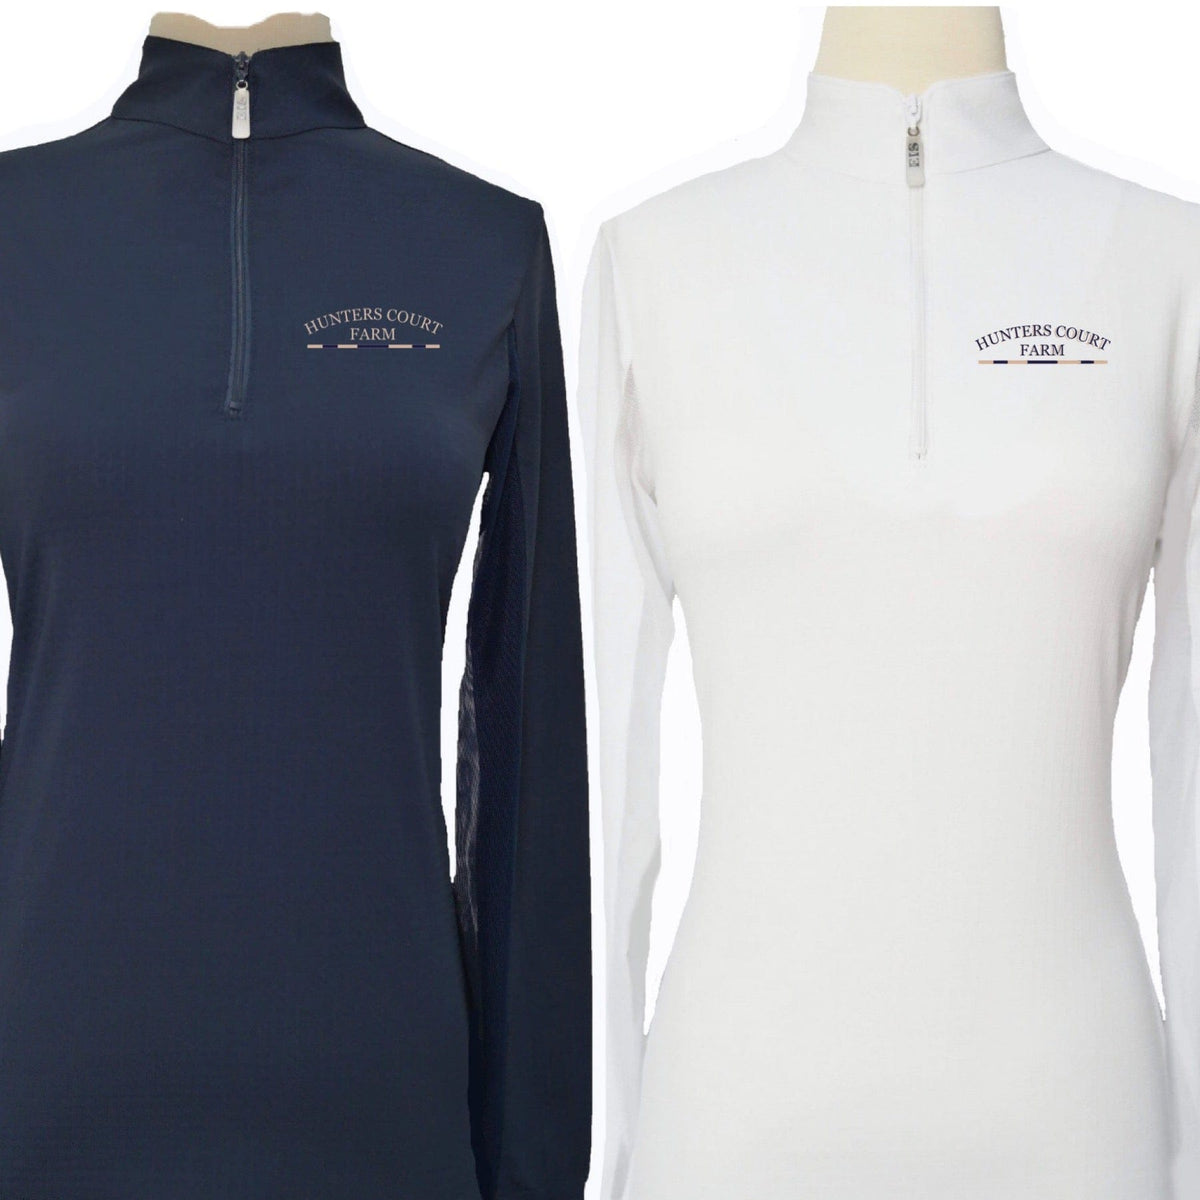 Equestrian Team Apparel Hunters Court Farm Ladies Sun Shirt equestrian team apparel online tack store mobile tack store custom farm apparel custom show stable clothing equestrian lifestyle horse show clothing riding clothes horses equestrian tack store